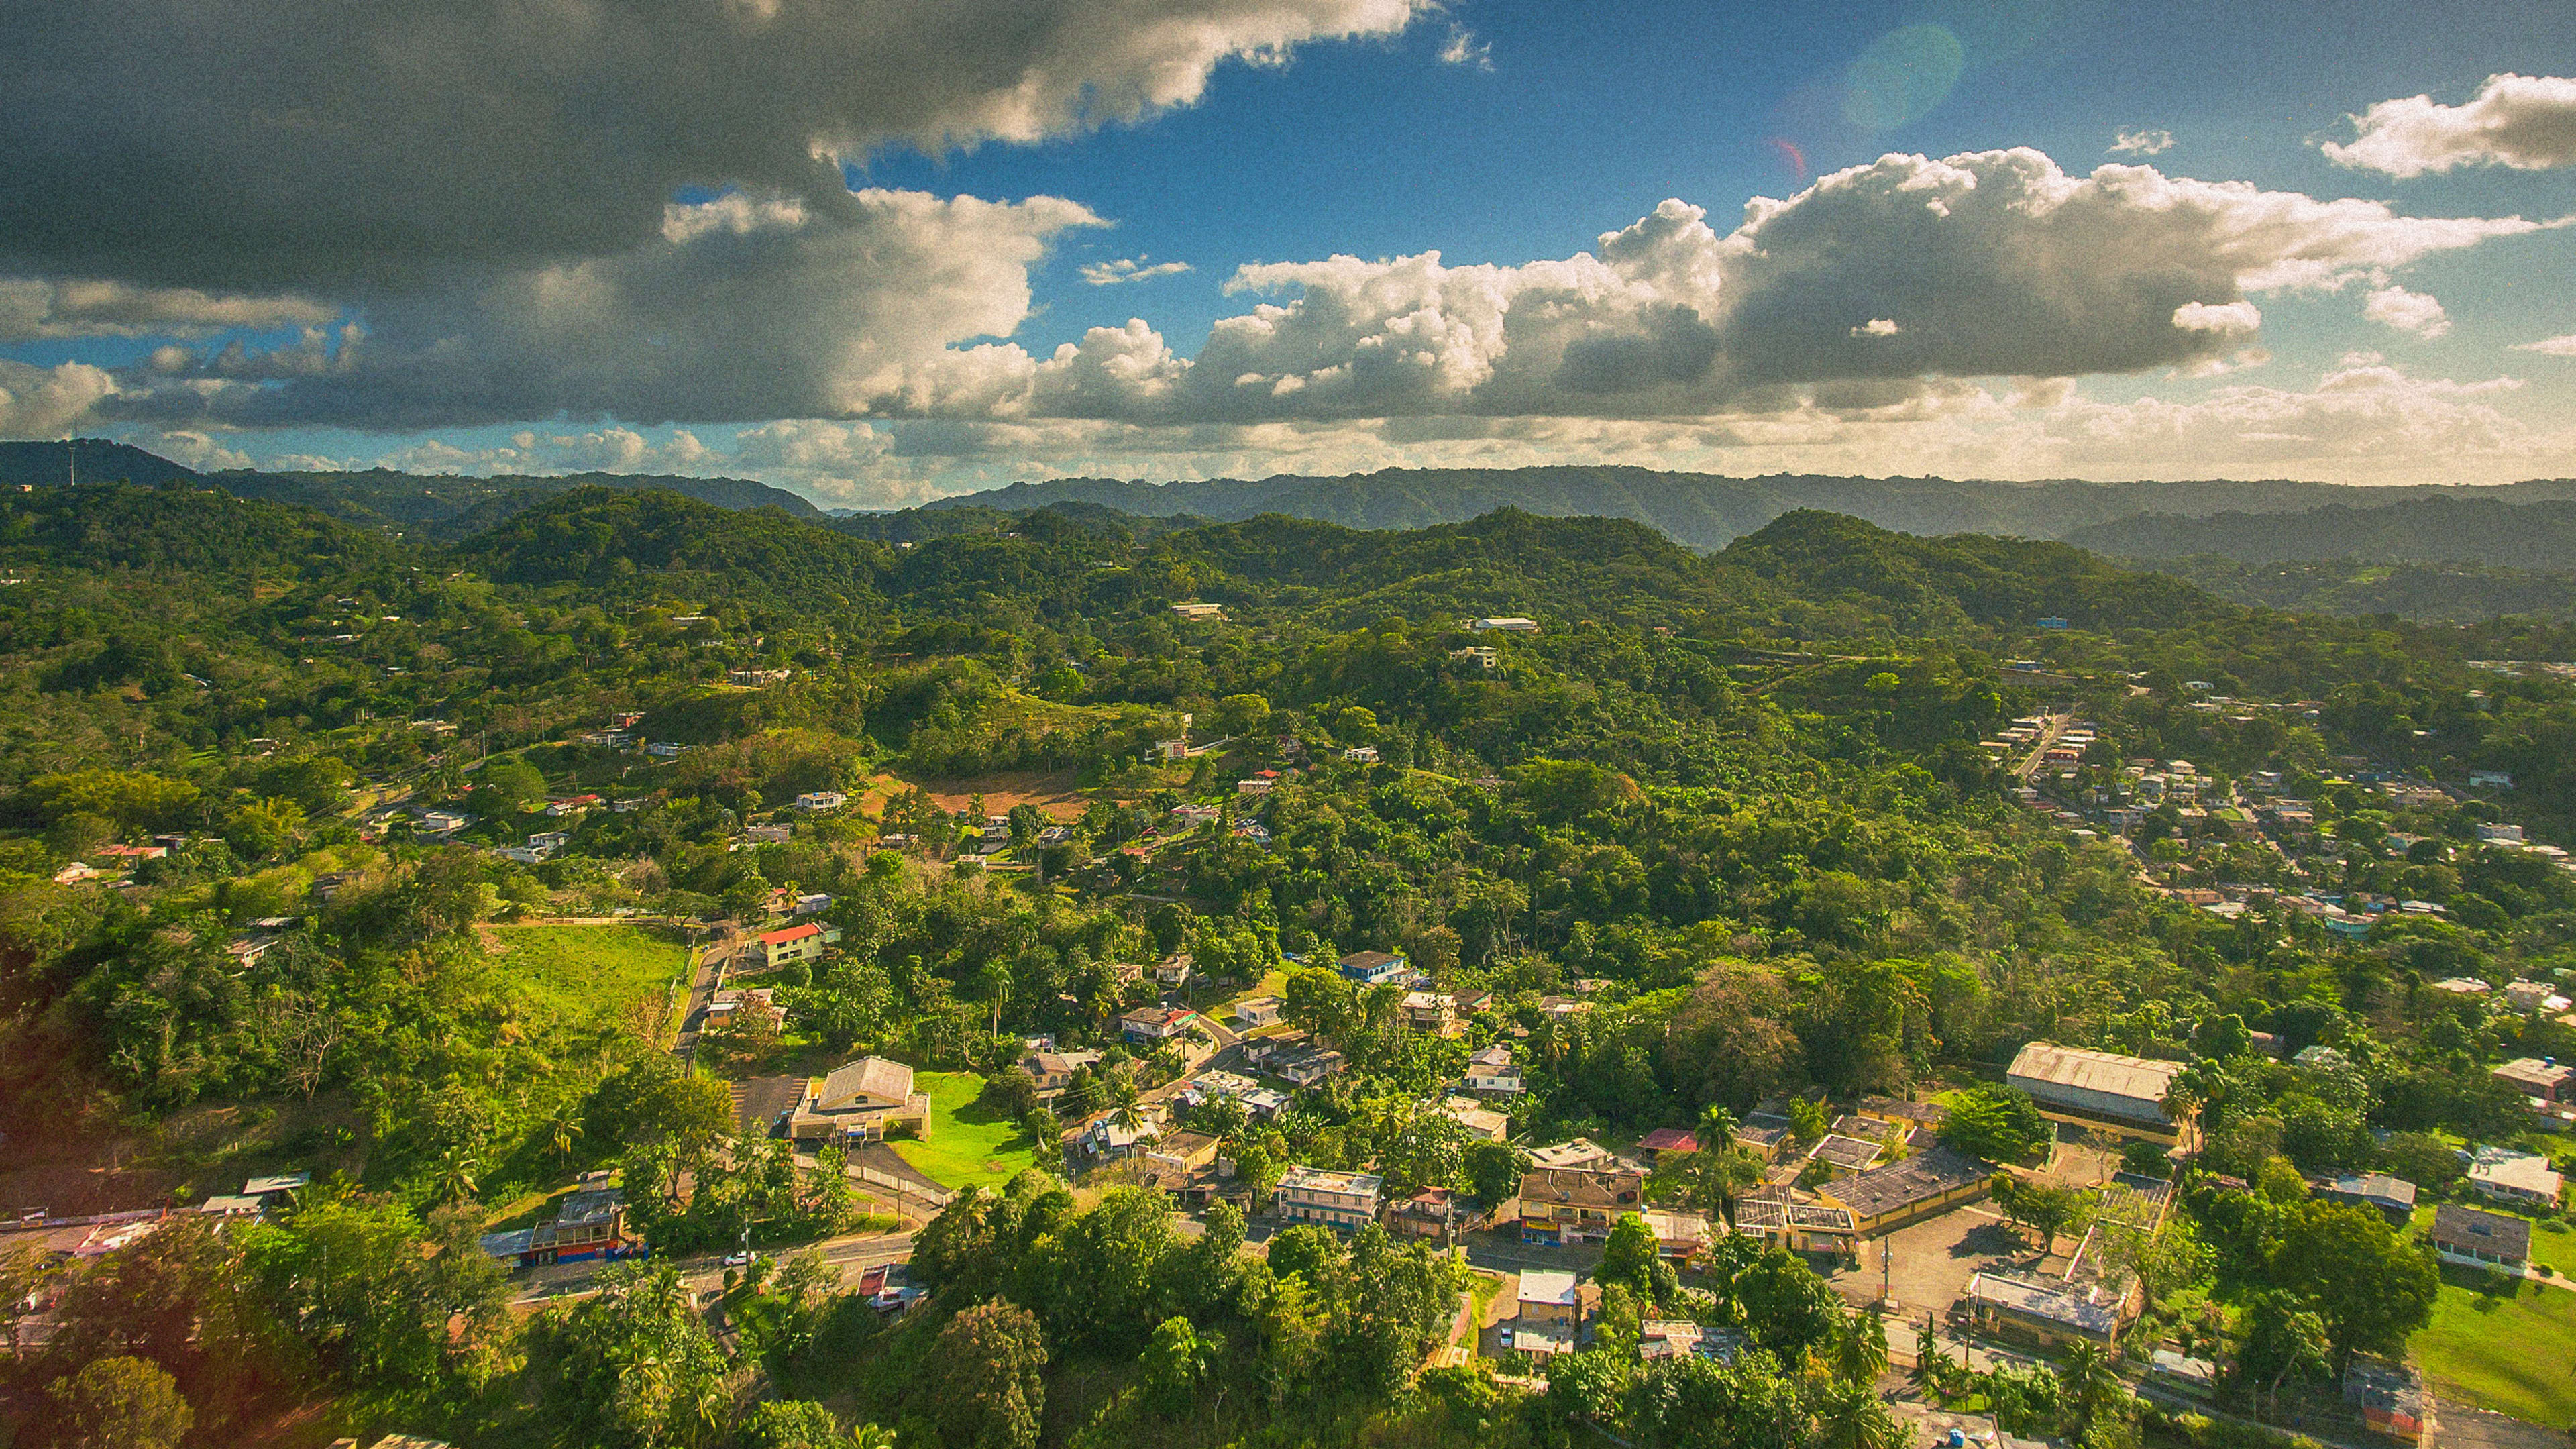 Puerto Rico could rebuild its power grid with renewables, but FEMA plans to fund fossil fuels